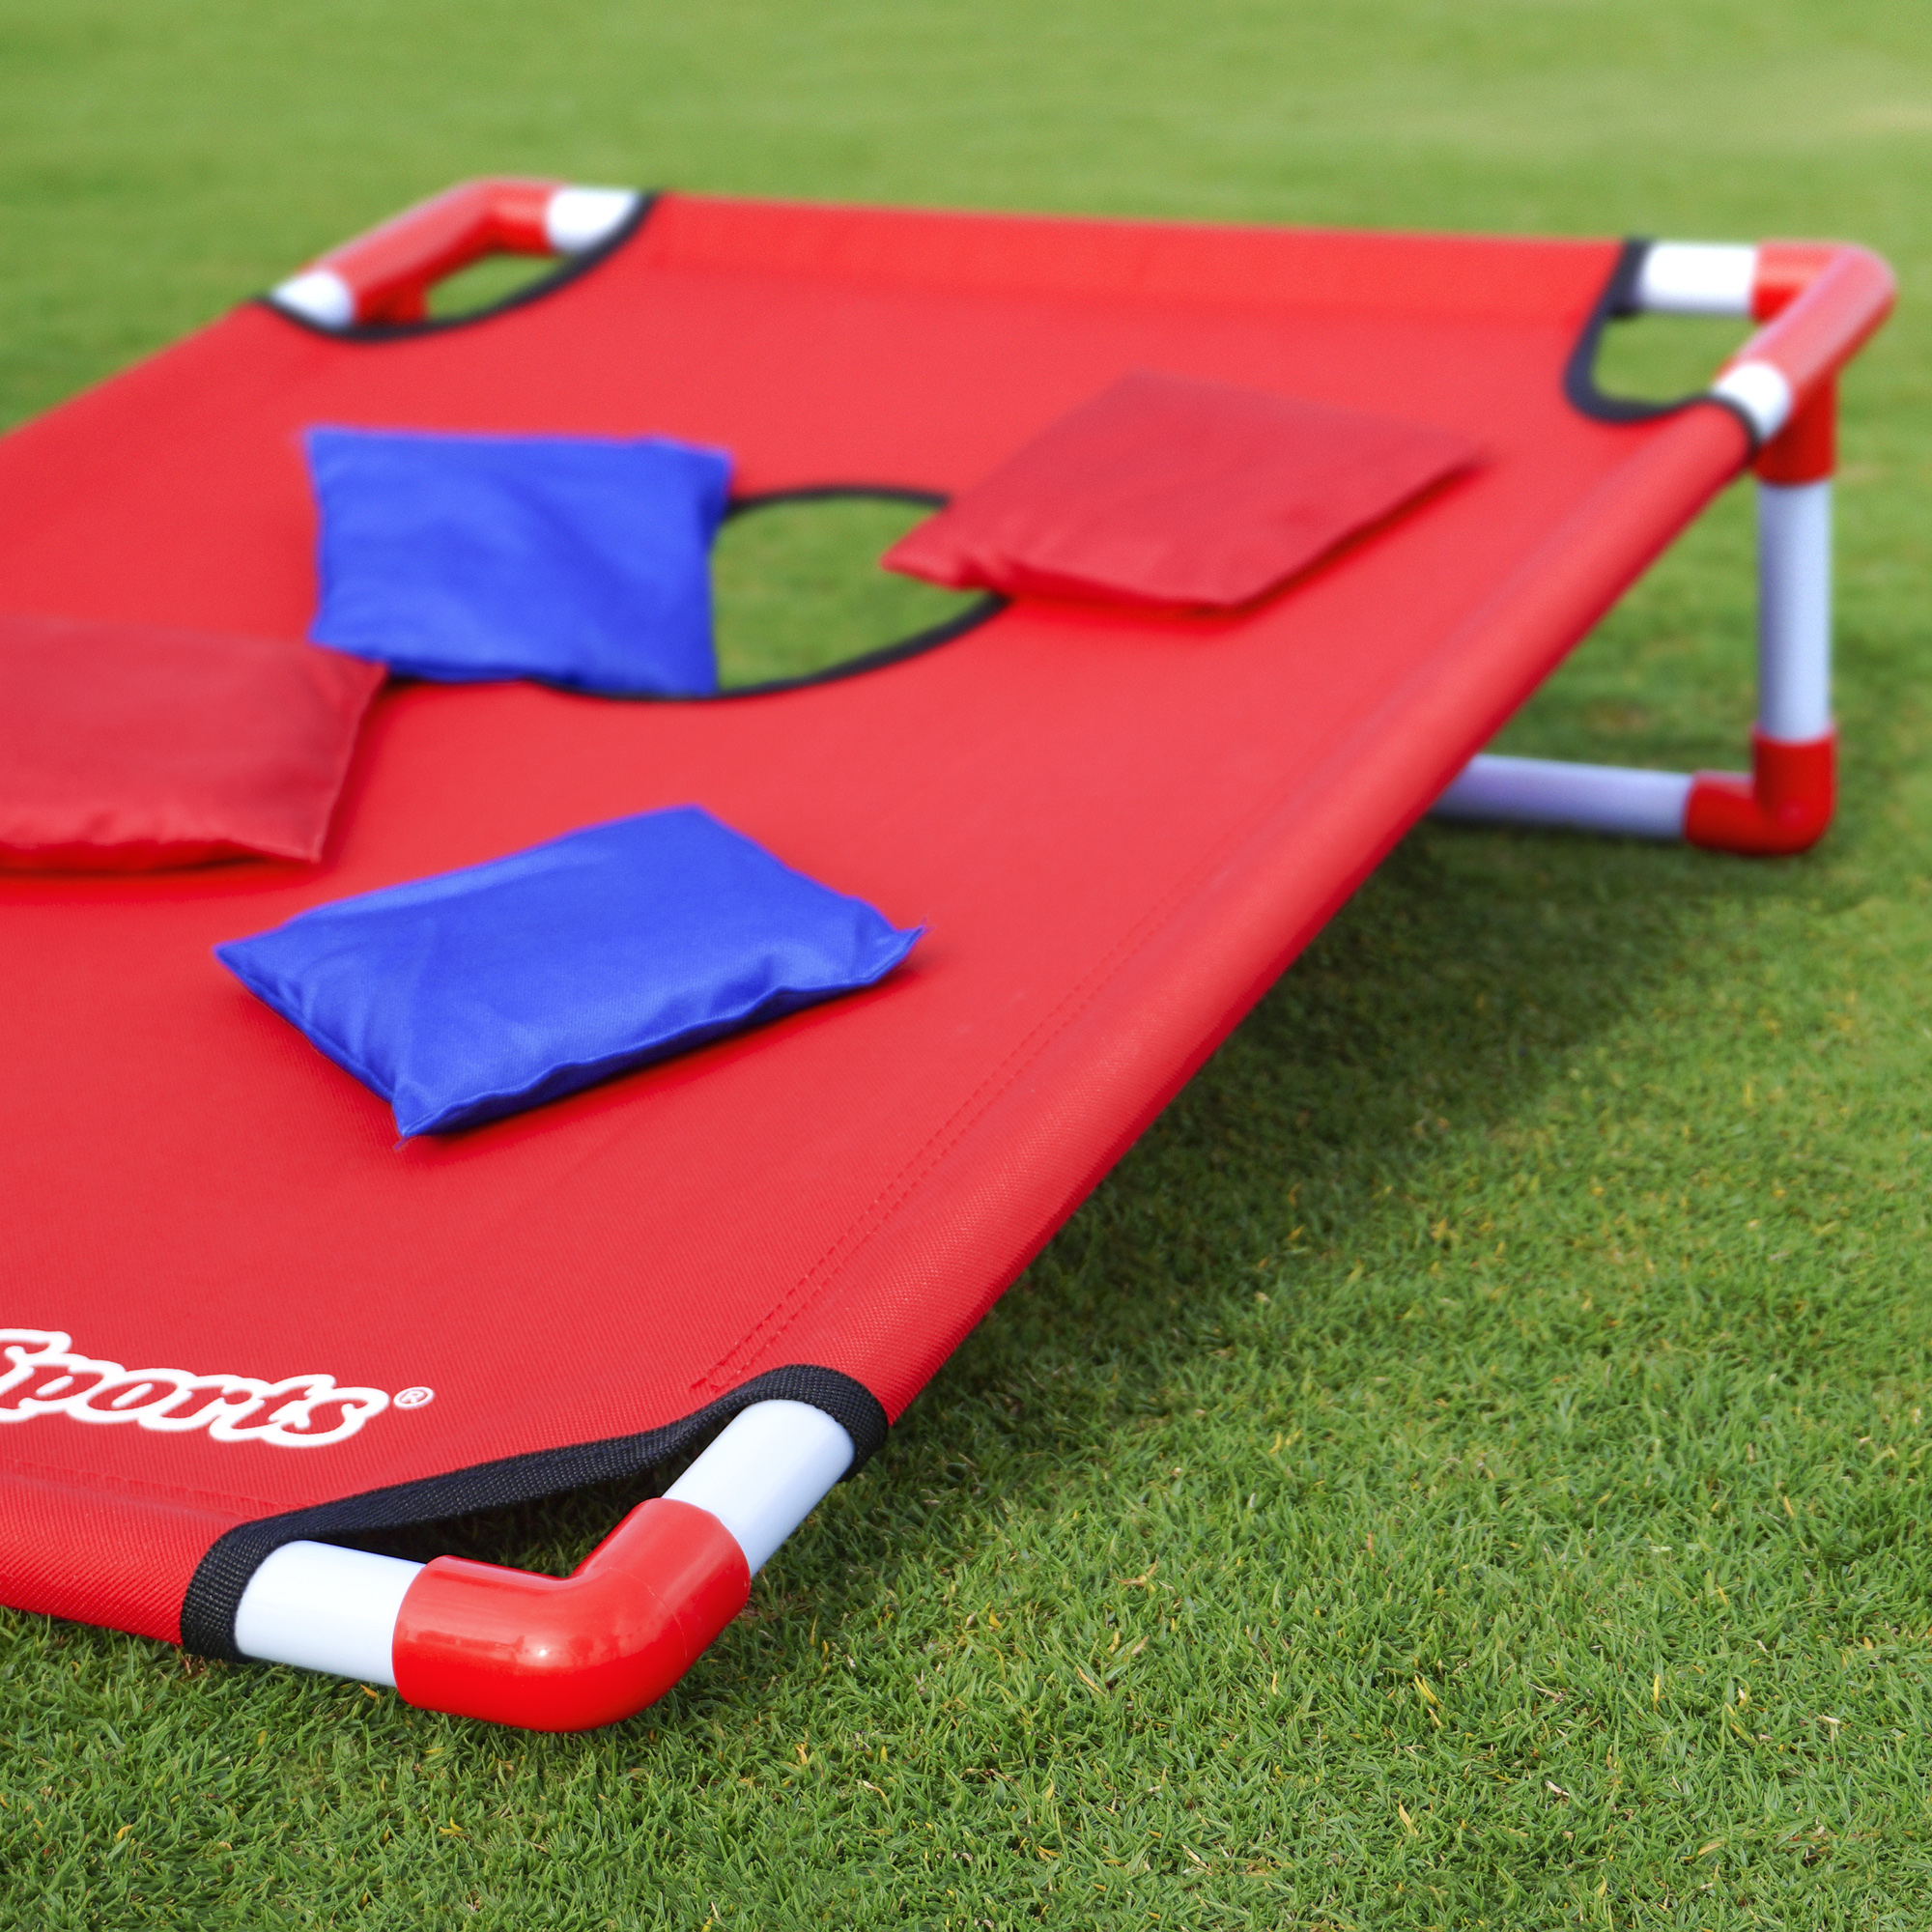 GoSports Foldable PVC Framed Cornhole Game Set with 8 Bean Bags and Portable Carrying Case - image 4 of 5